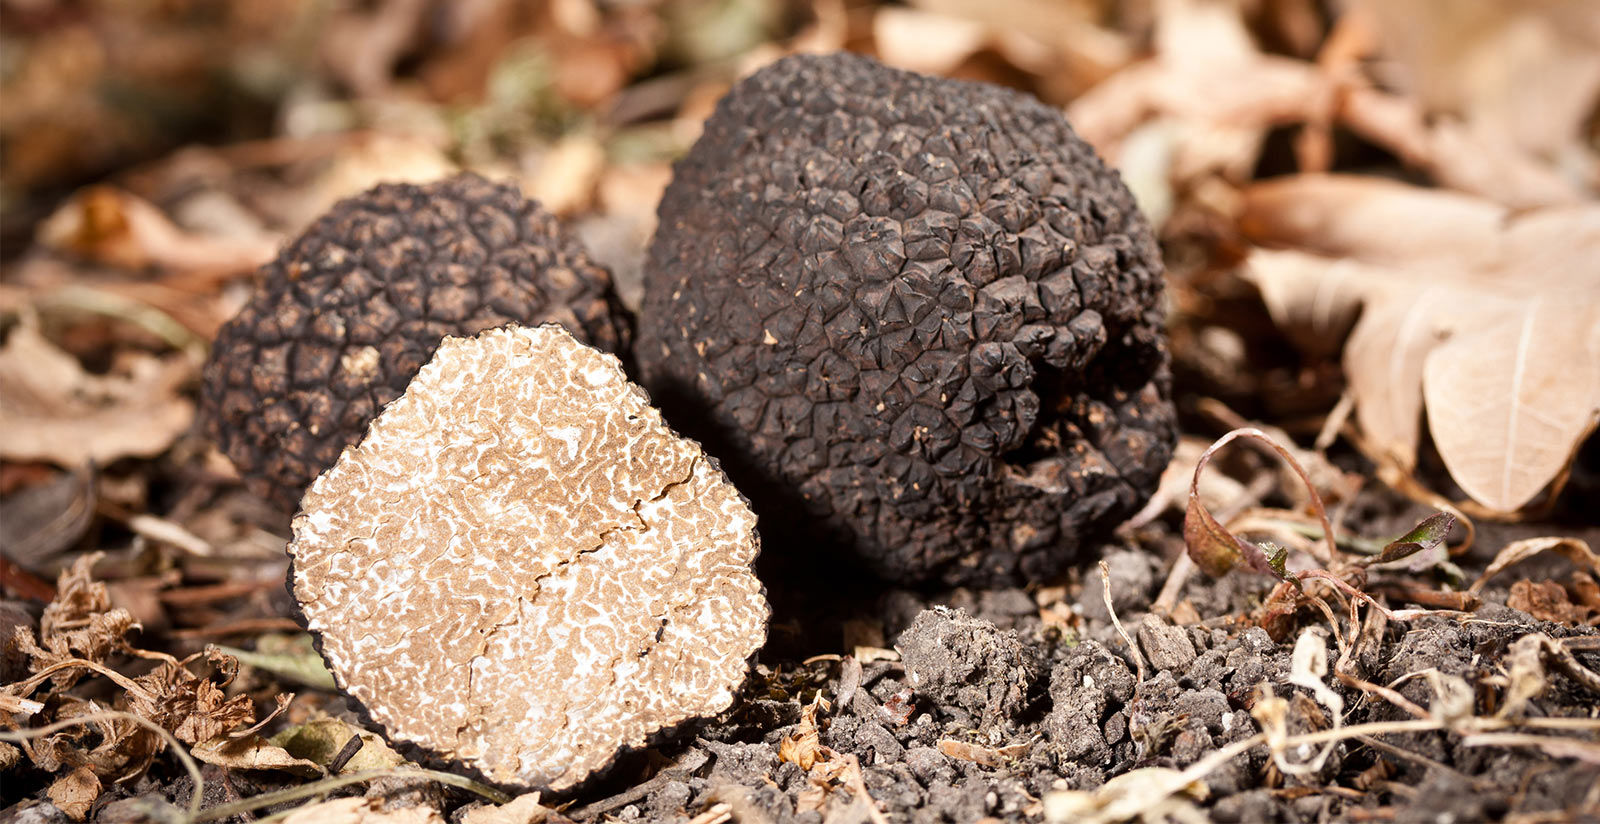 Grand Hotel Imperiale - Truffle Hunt in Tuscany 2